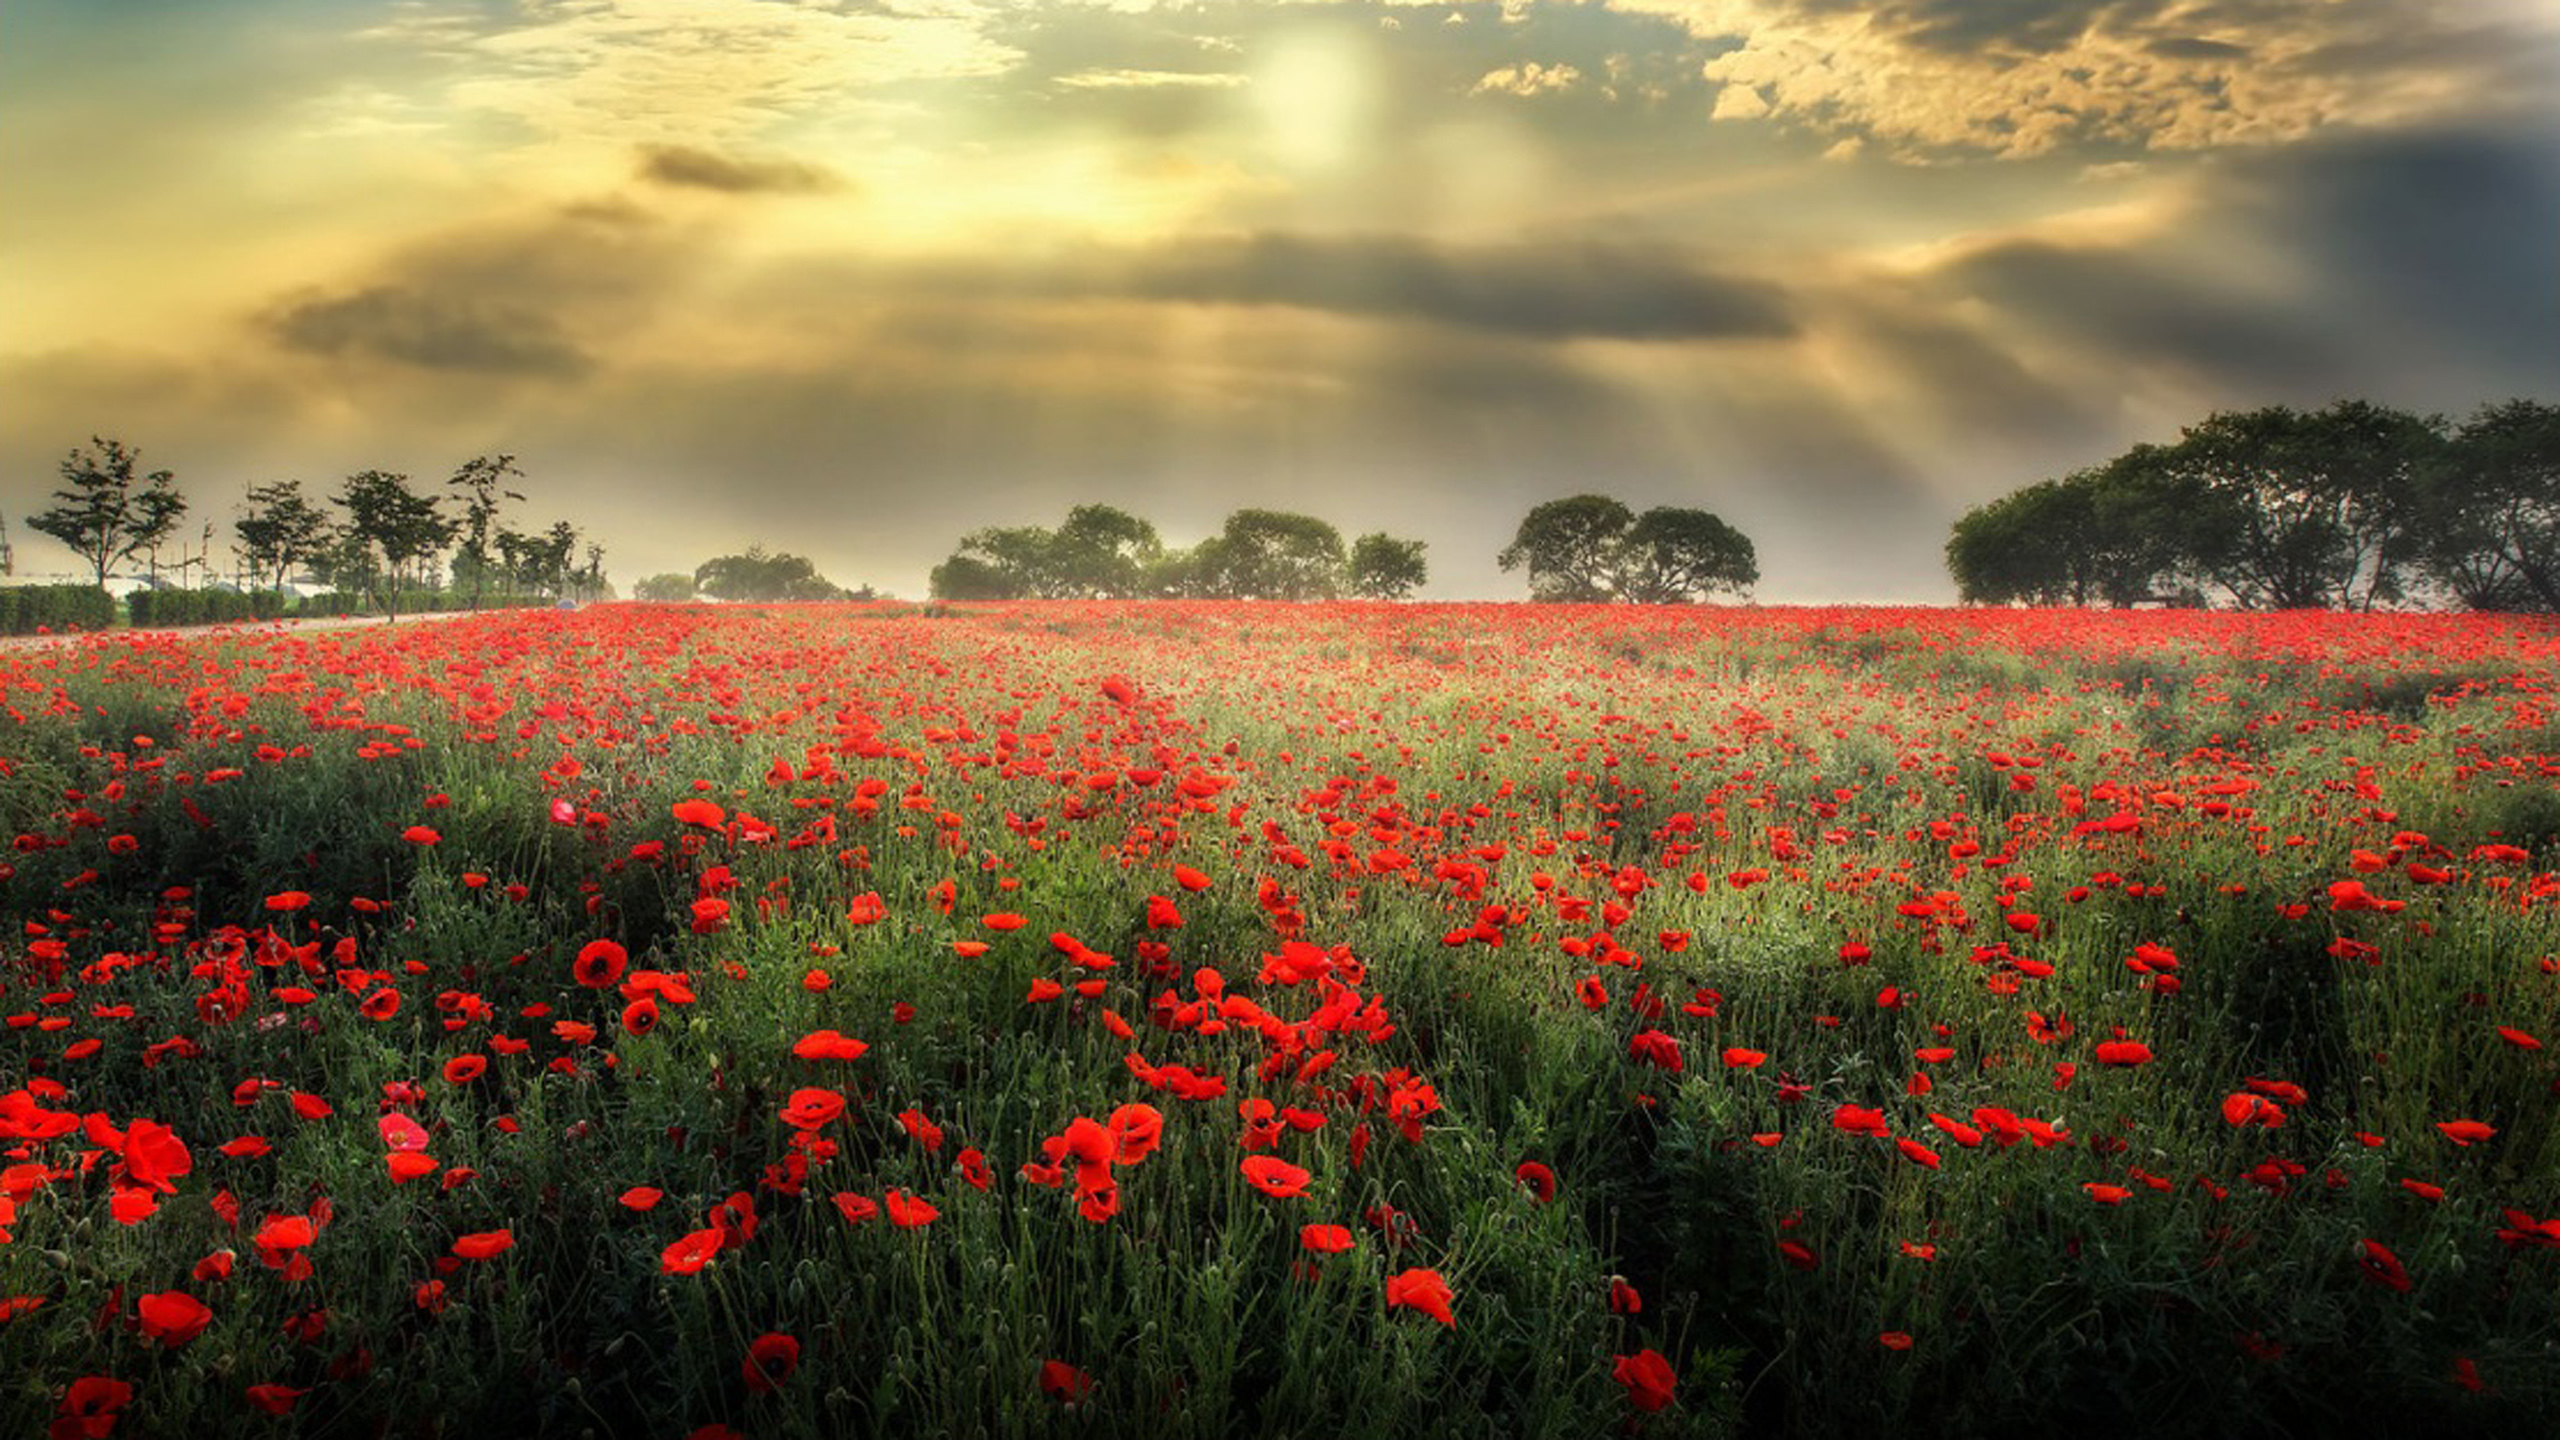 Field Of Red And White Poppies - HD Wallpaper 